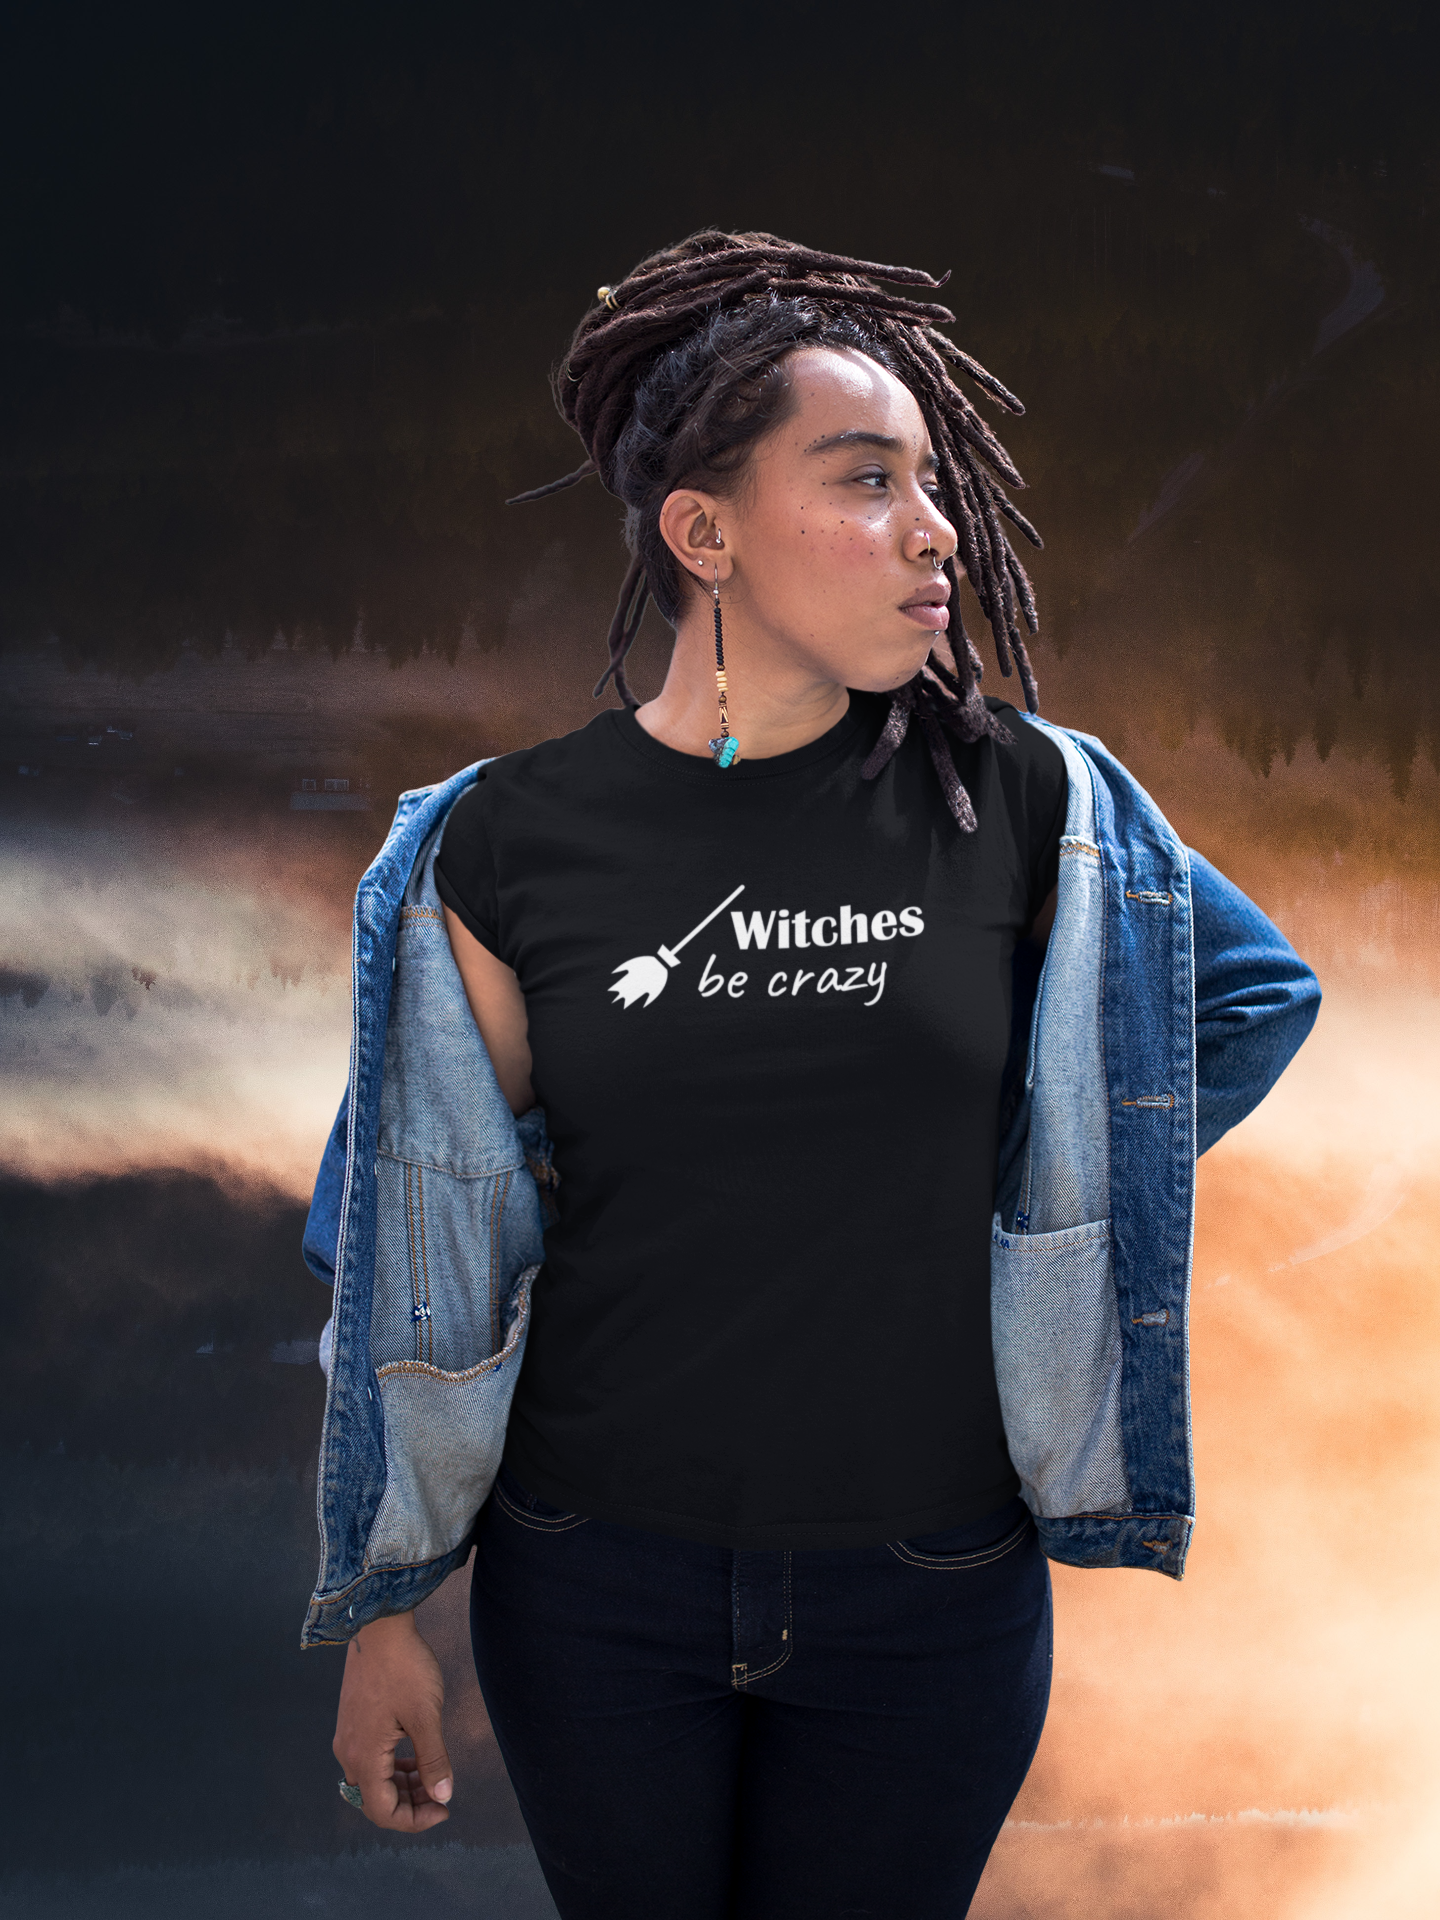 Witches be Crazy, witchy t-shirt